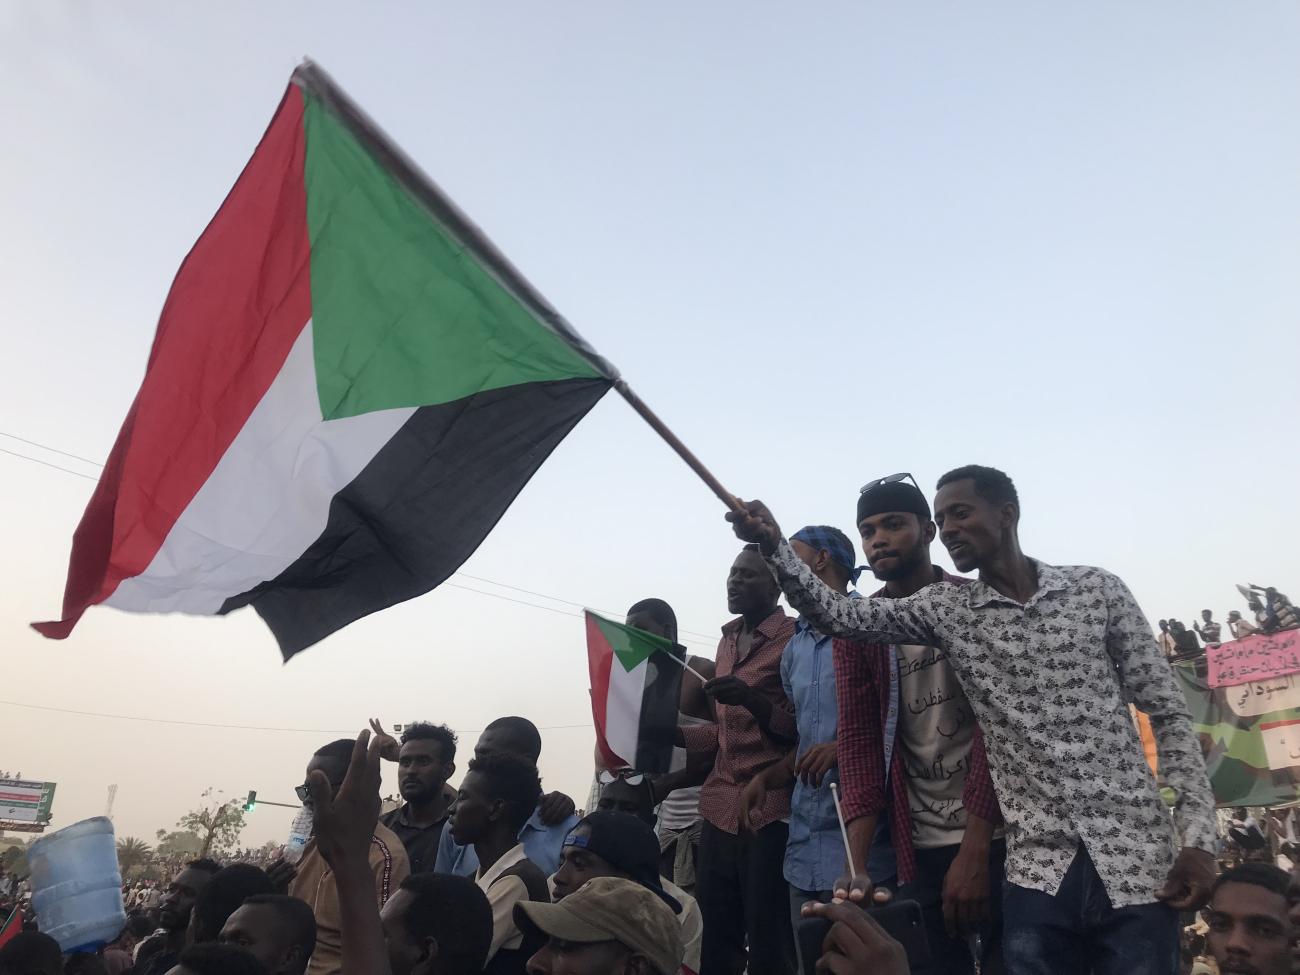 Protesters take to streets in the Sudanese capital, Khartoum. (11 April 2019)